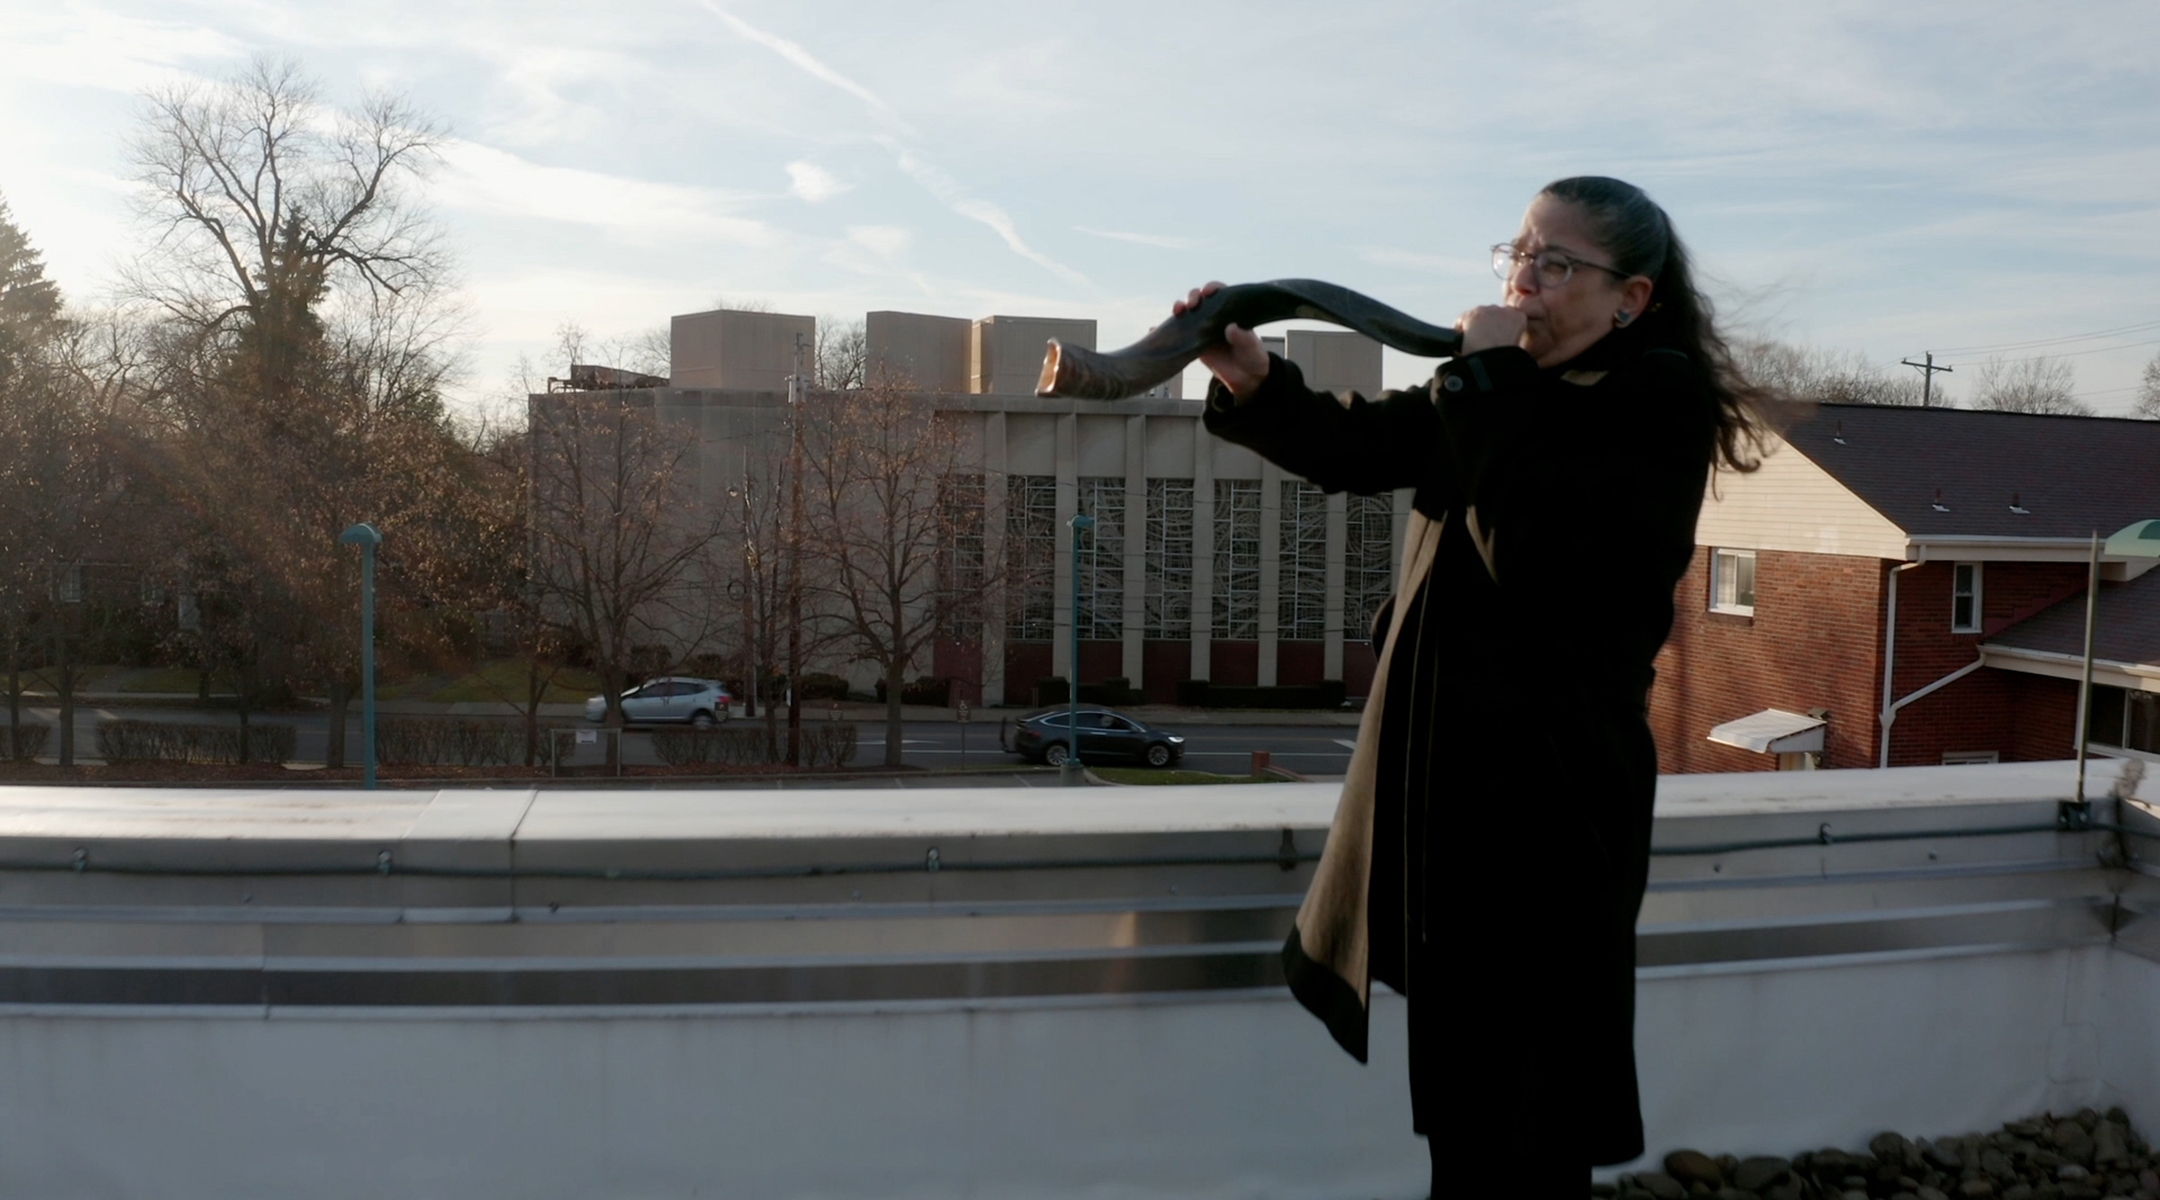 Audrey Glickman, a survivor of the 2018 Tree of Life synagogue shooting in Pittsburgh, blows the shofar outside the building in the new HBO documentary “A Tree of Life.” (HBO)